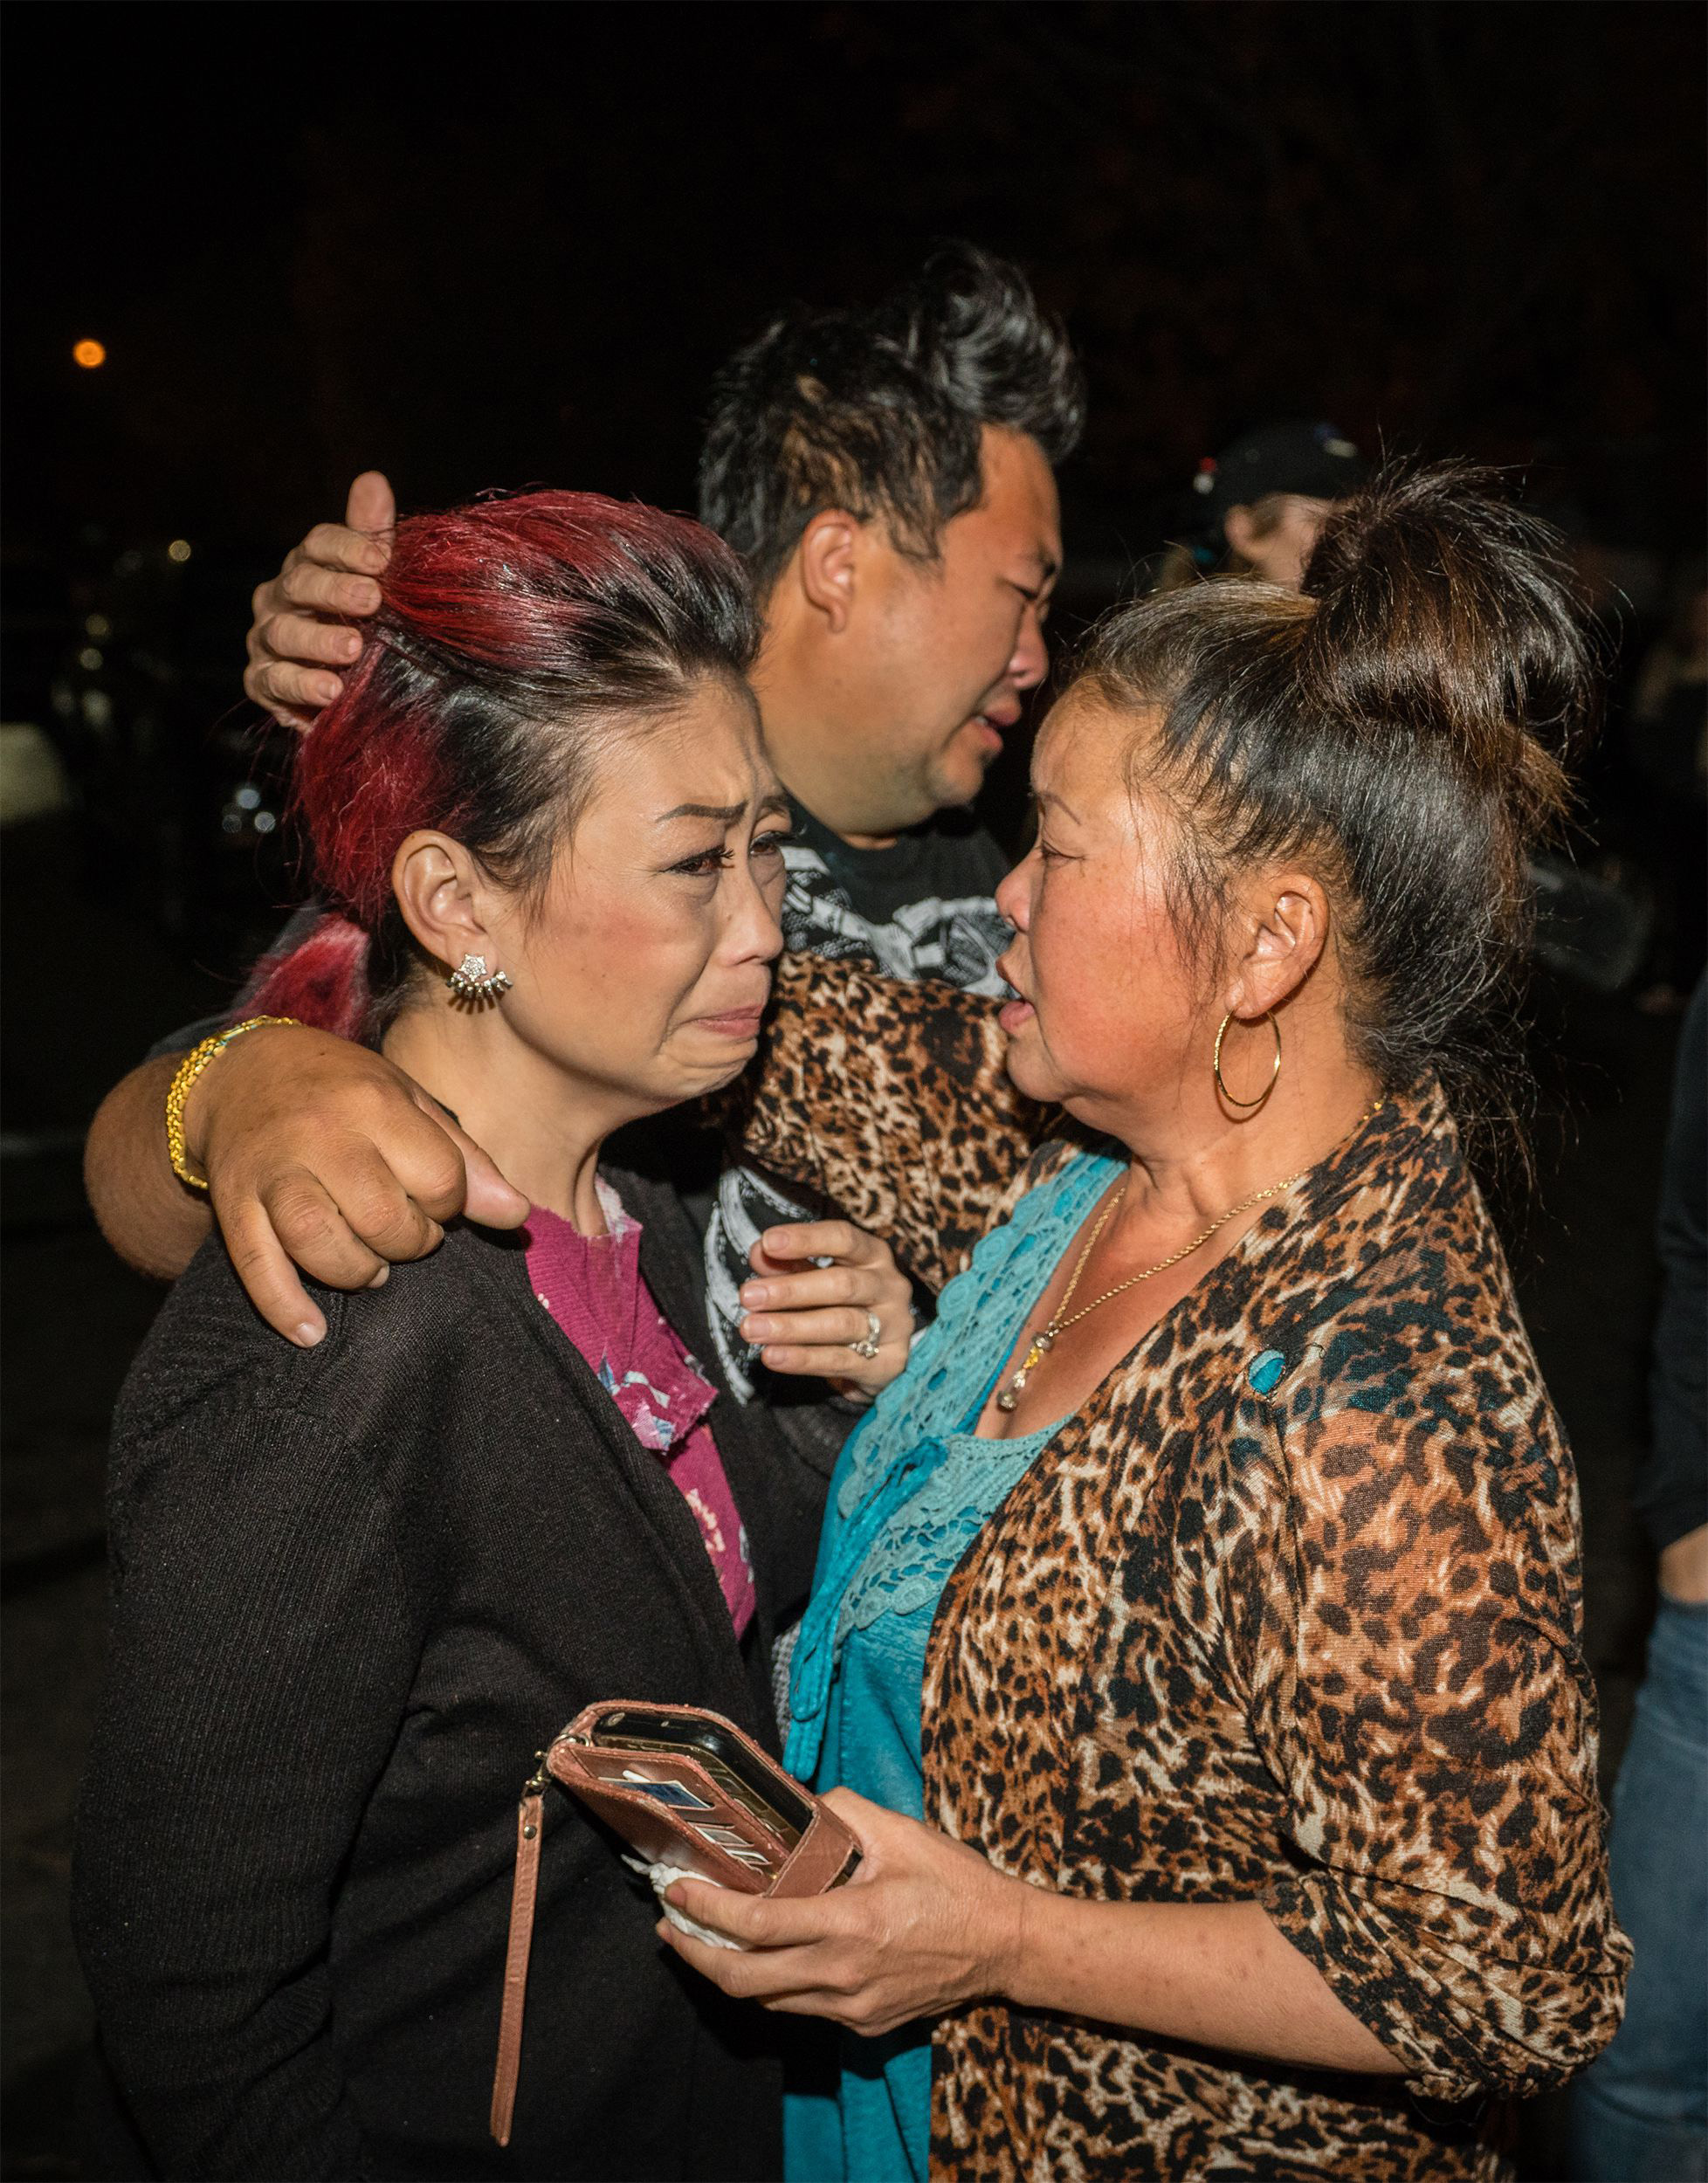 PHOTO: People react near the scene of a shooting in Fresno, Calif., Nov. 17 2019.